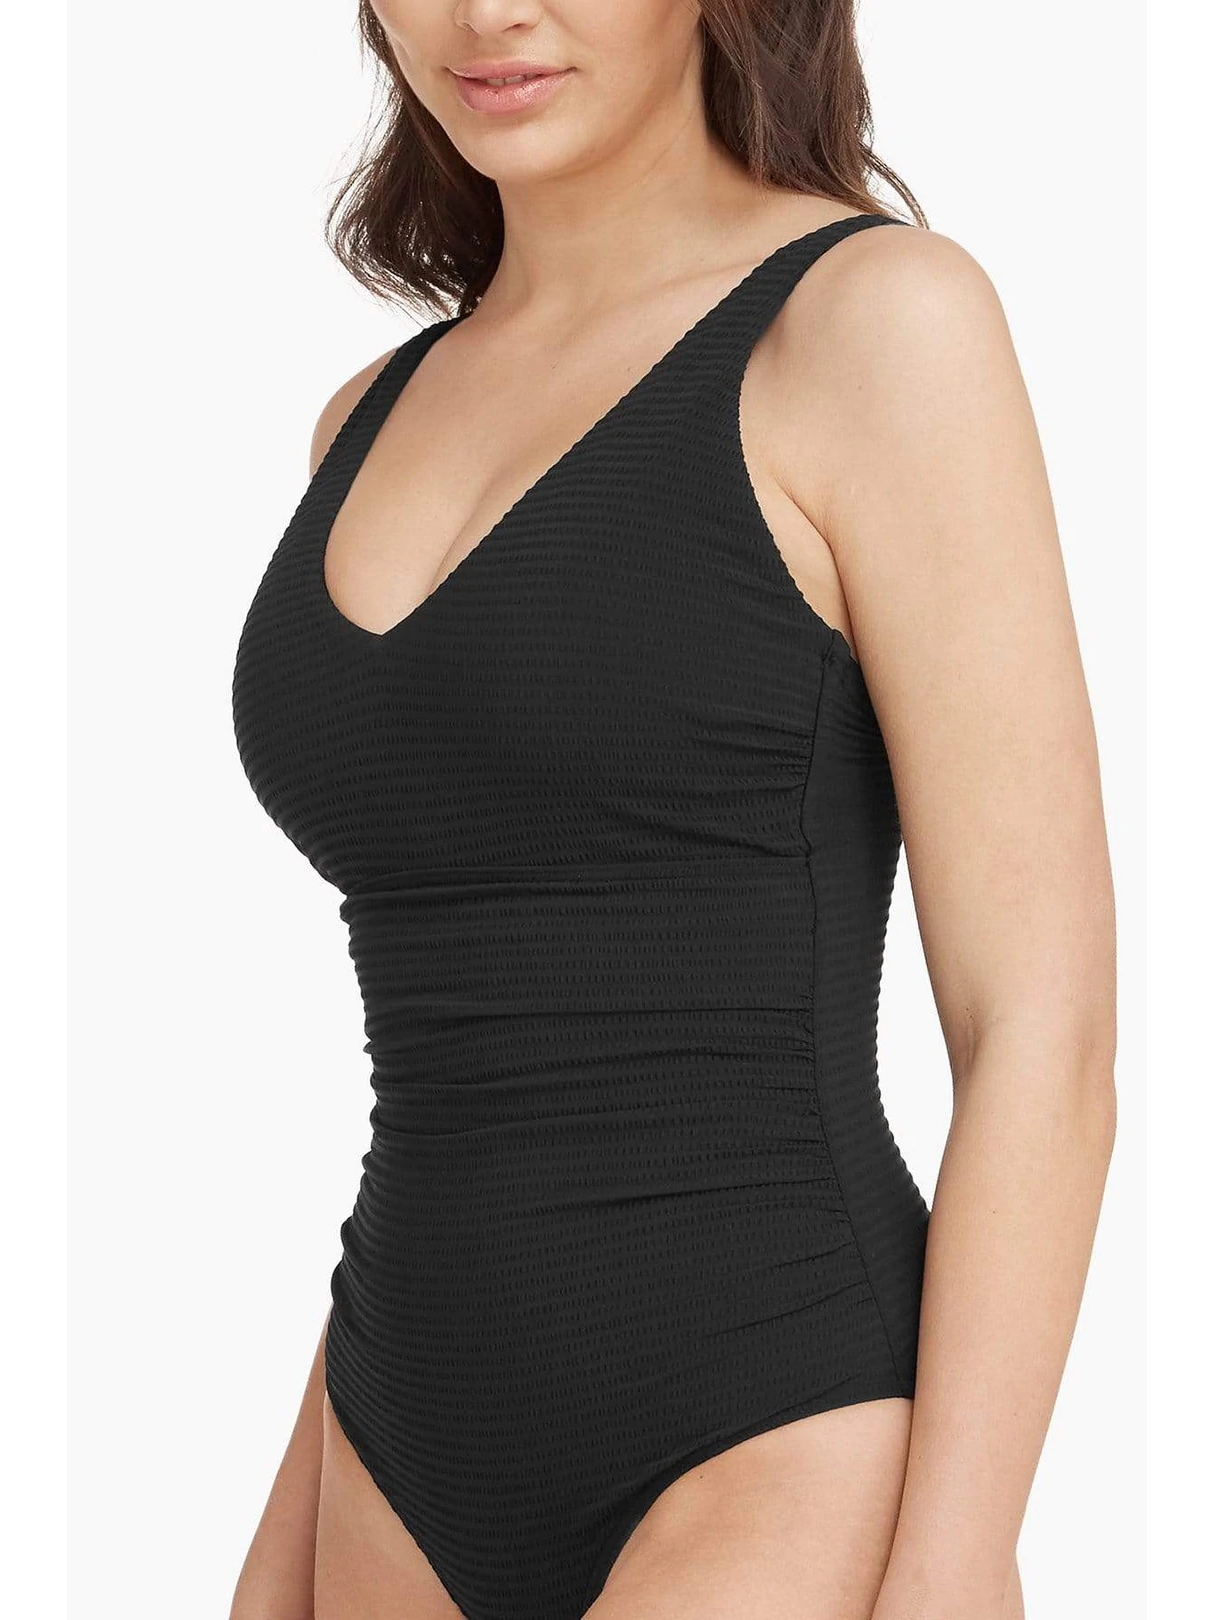 Sea Level Messina D/DD Cup One Piece in Black